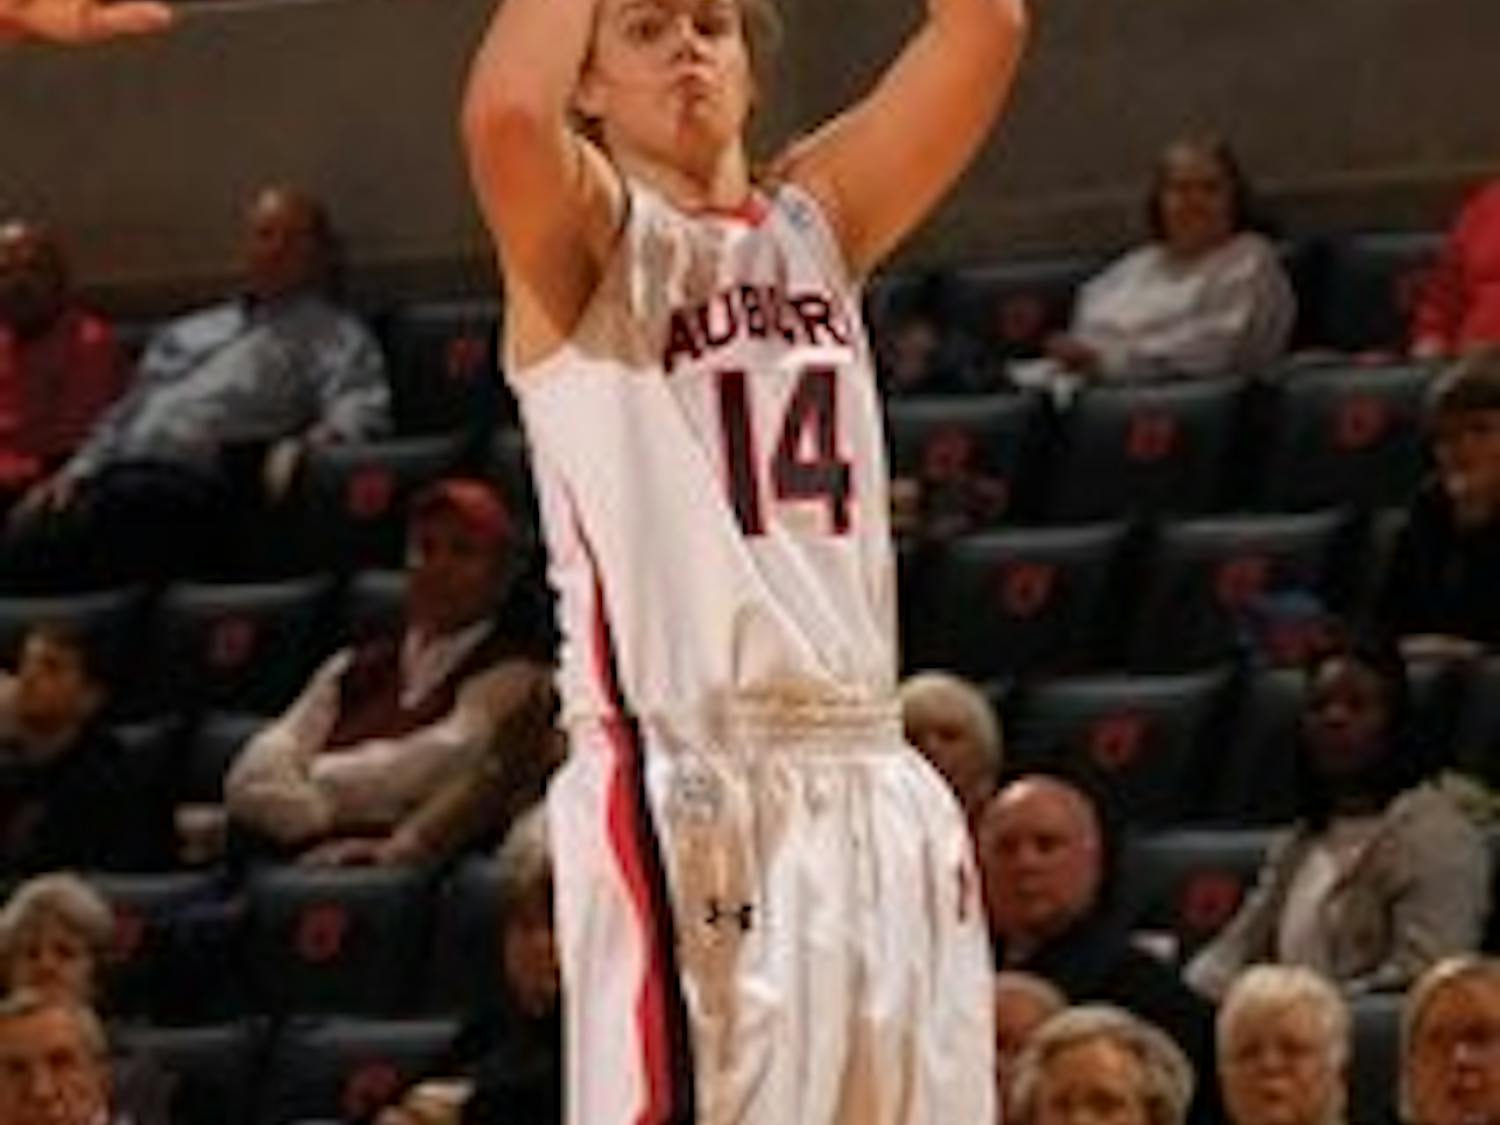 As a freshman, Alverson played in all 31 games and recorded 215 points. (Todd Van Emst / Media Relations)